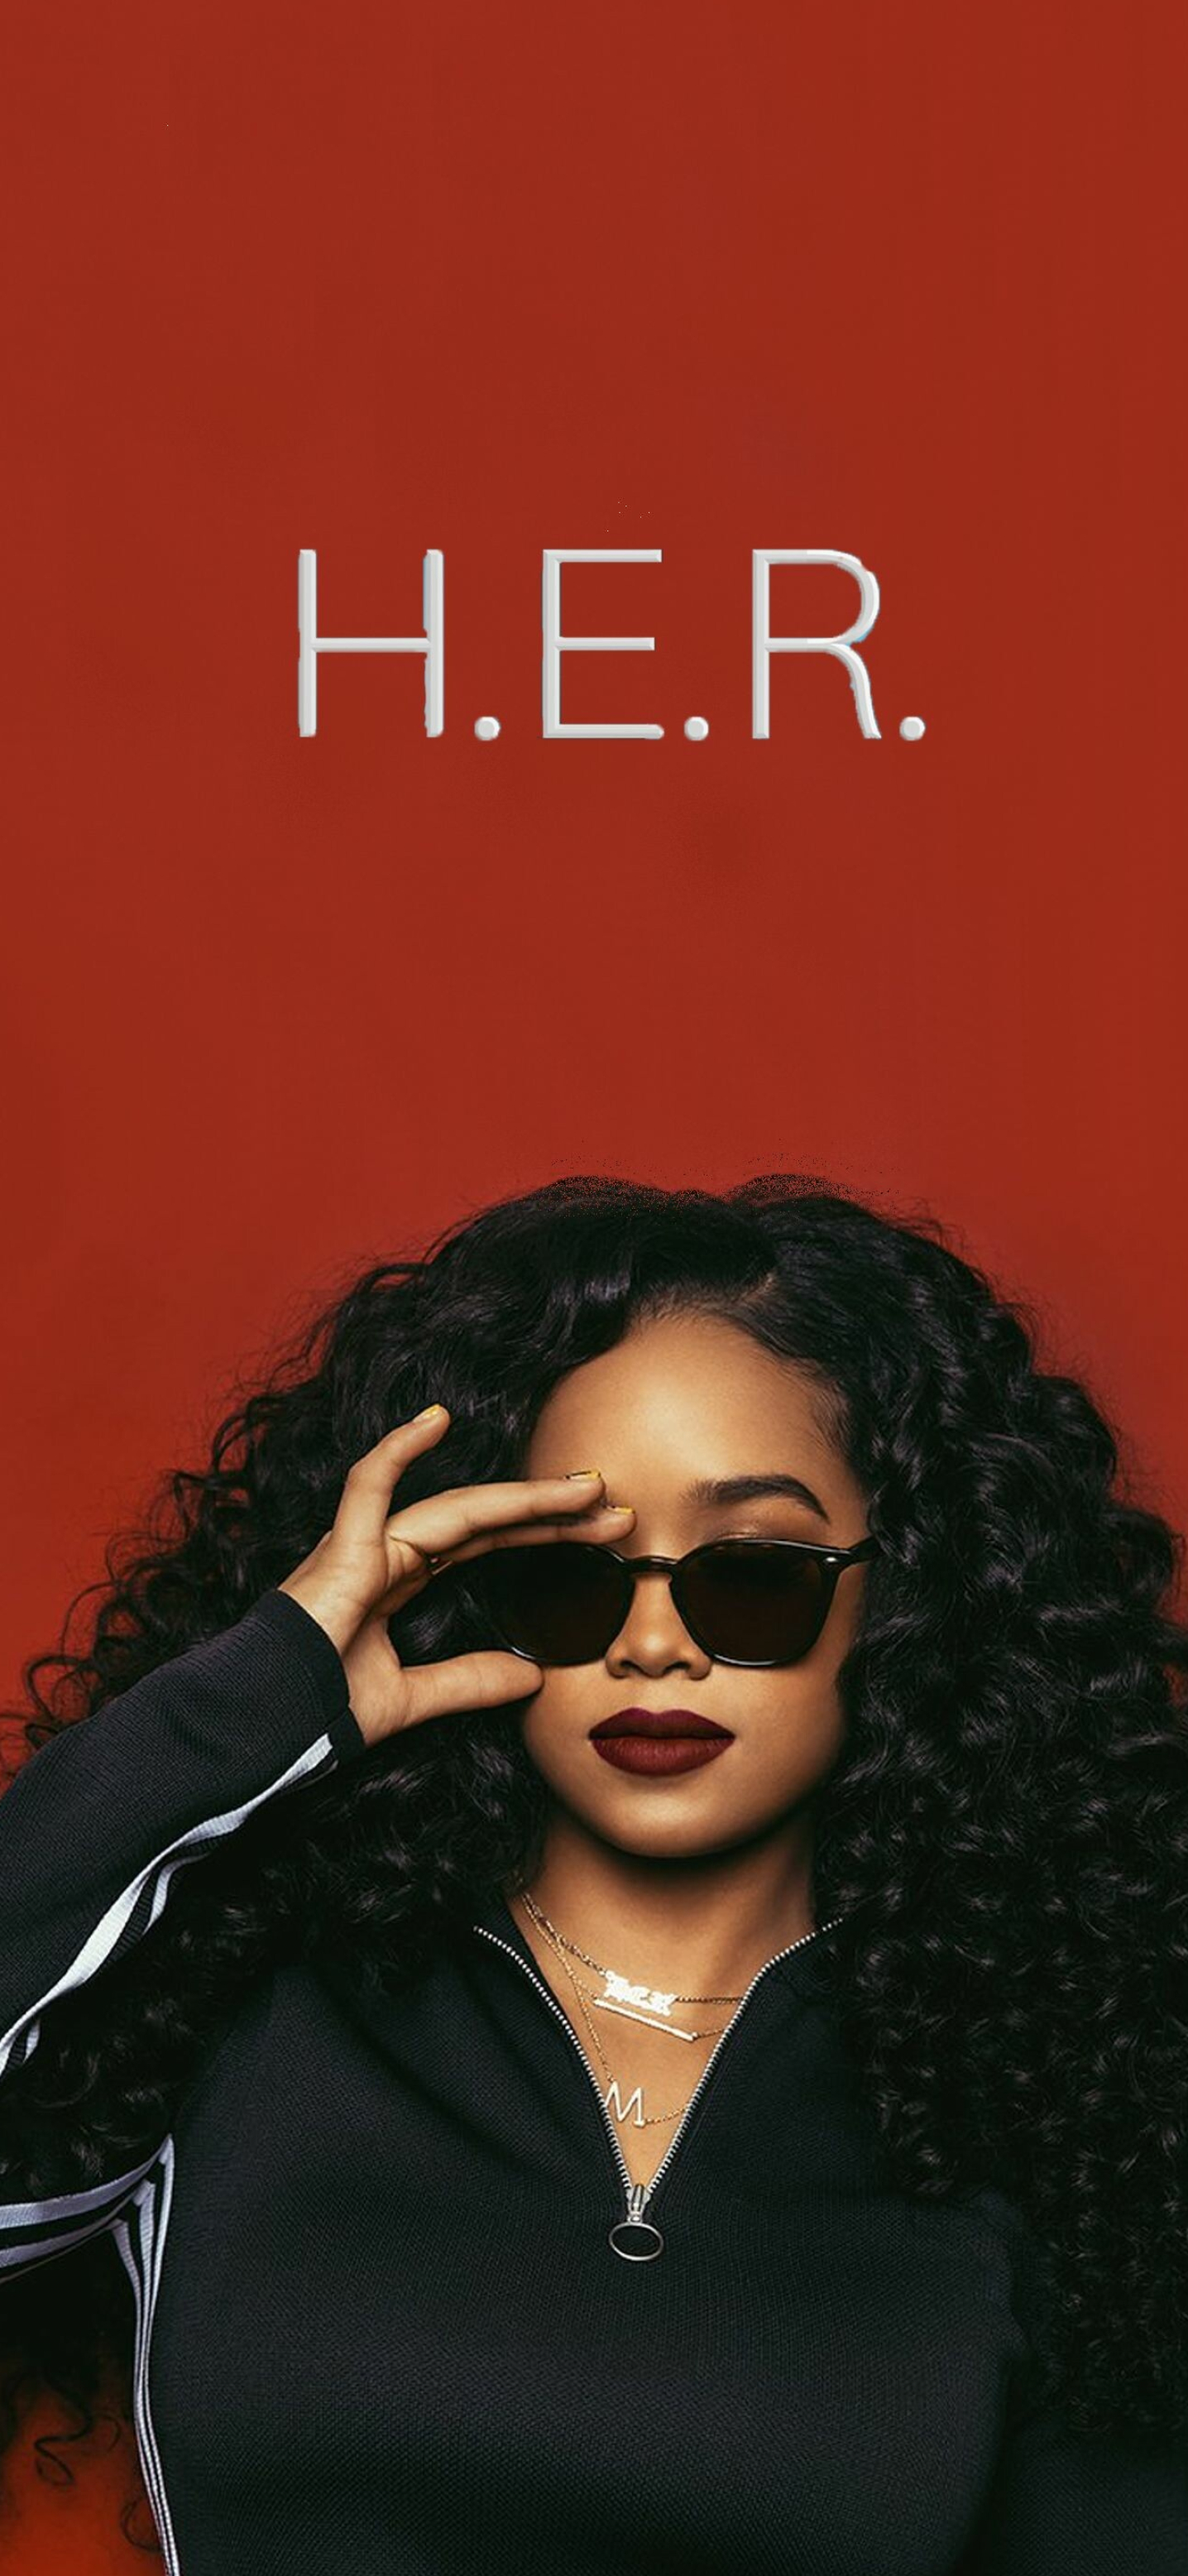 H.E.R.: Singer, Academy Award for Best Original Song, "Fight for You". 1440x3120 HD Wallpaper.